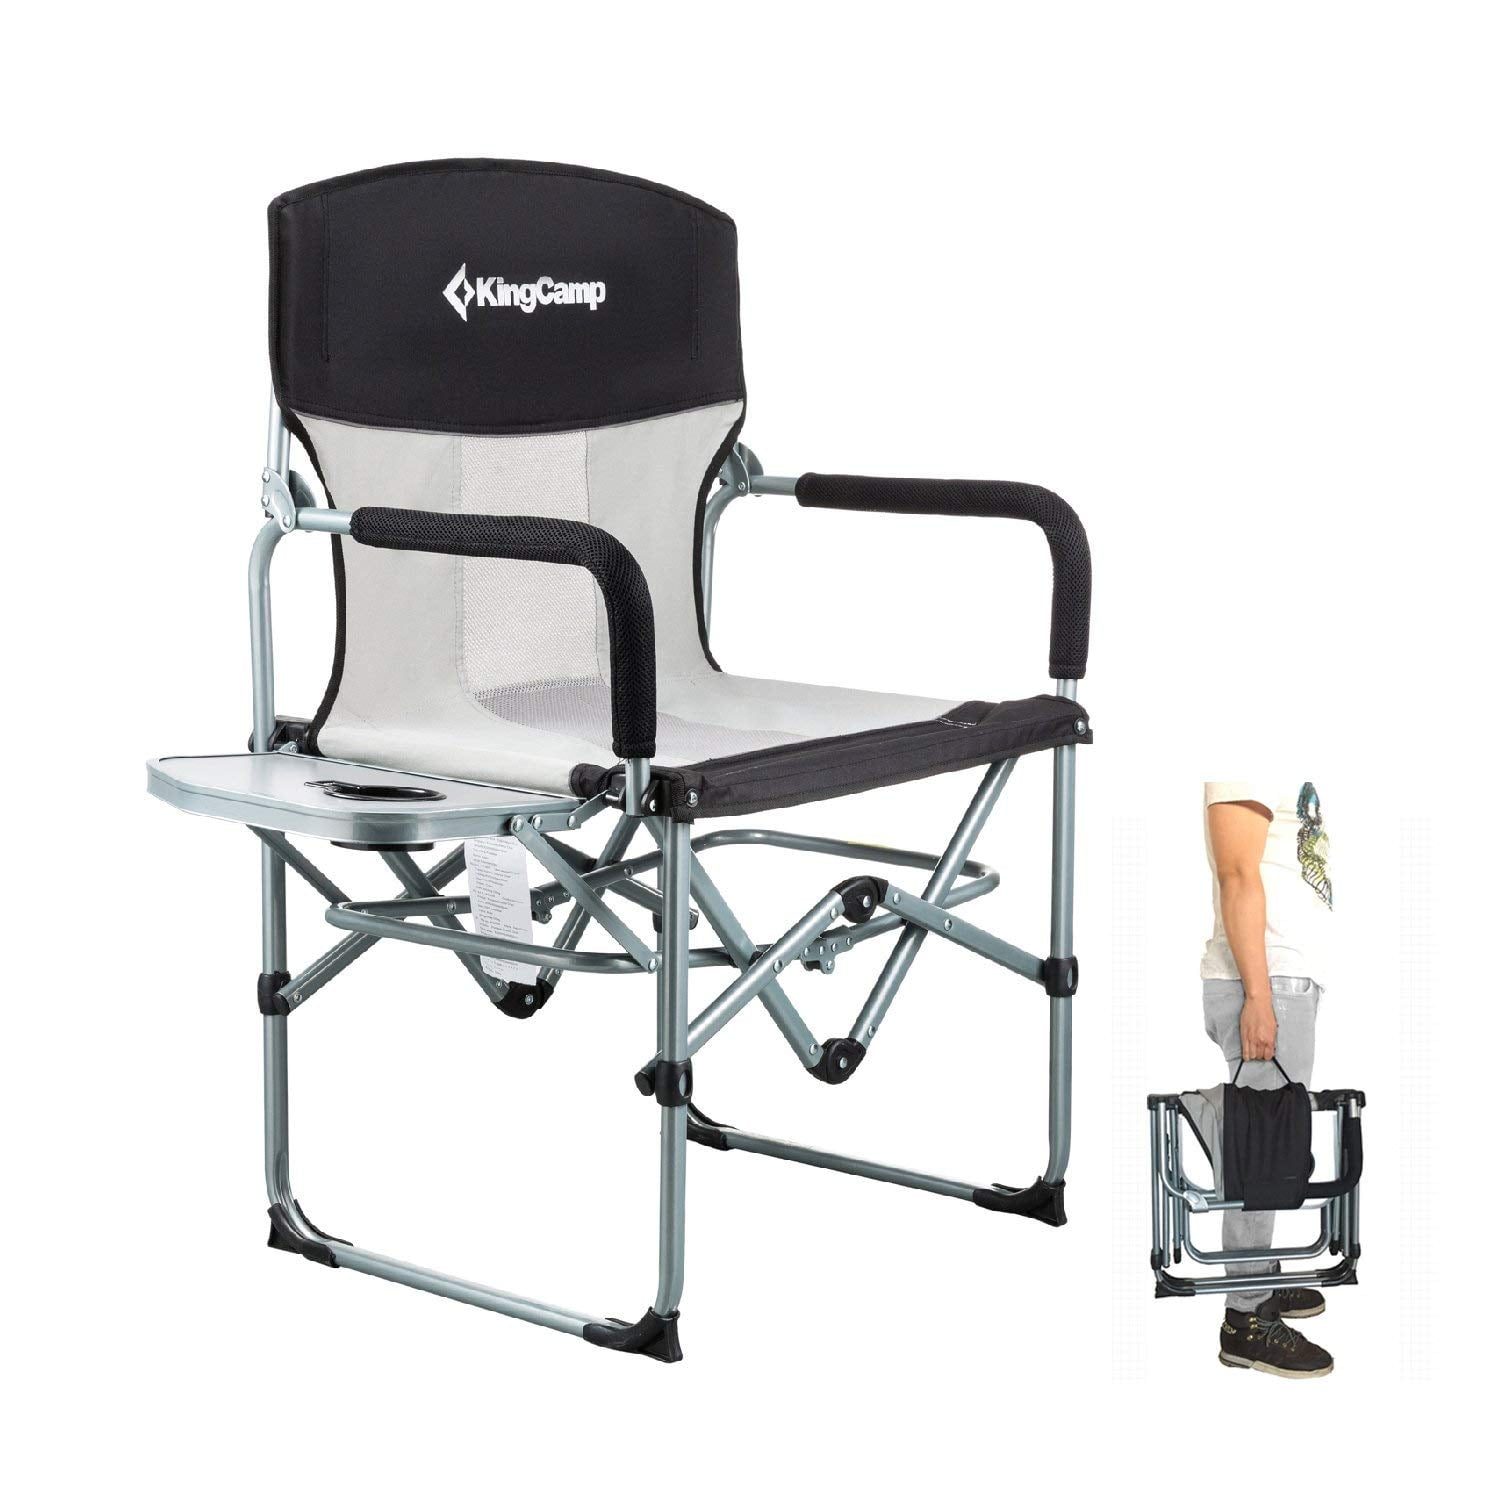 kingcamp heavy duty compact camping folding mesh chair with side table and handle